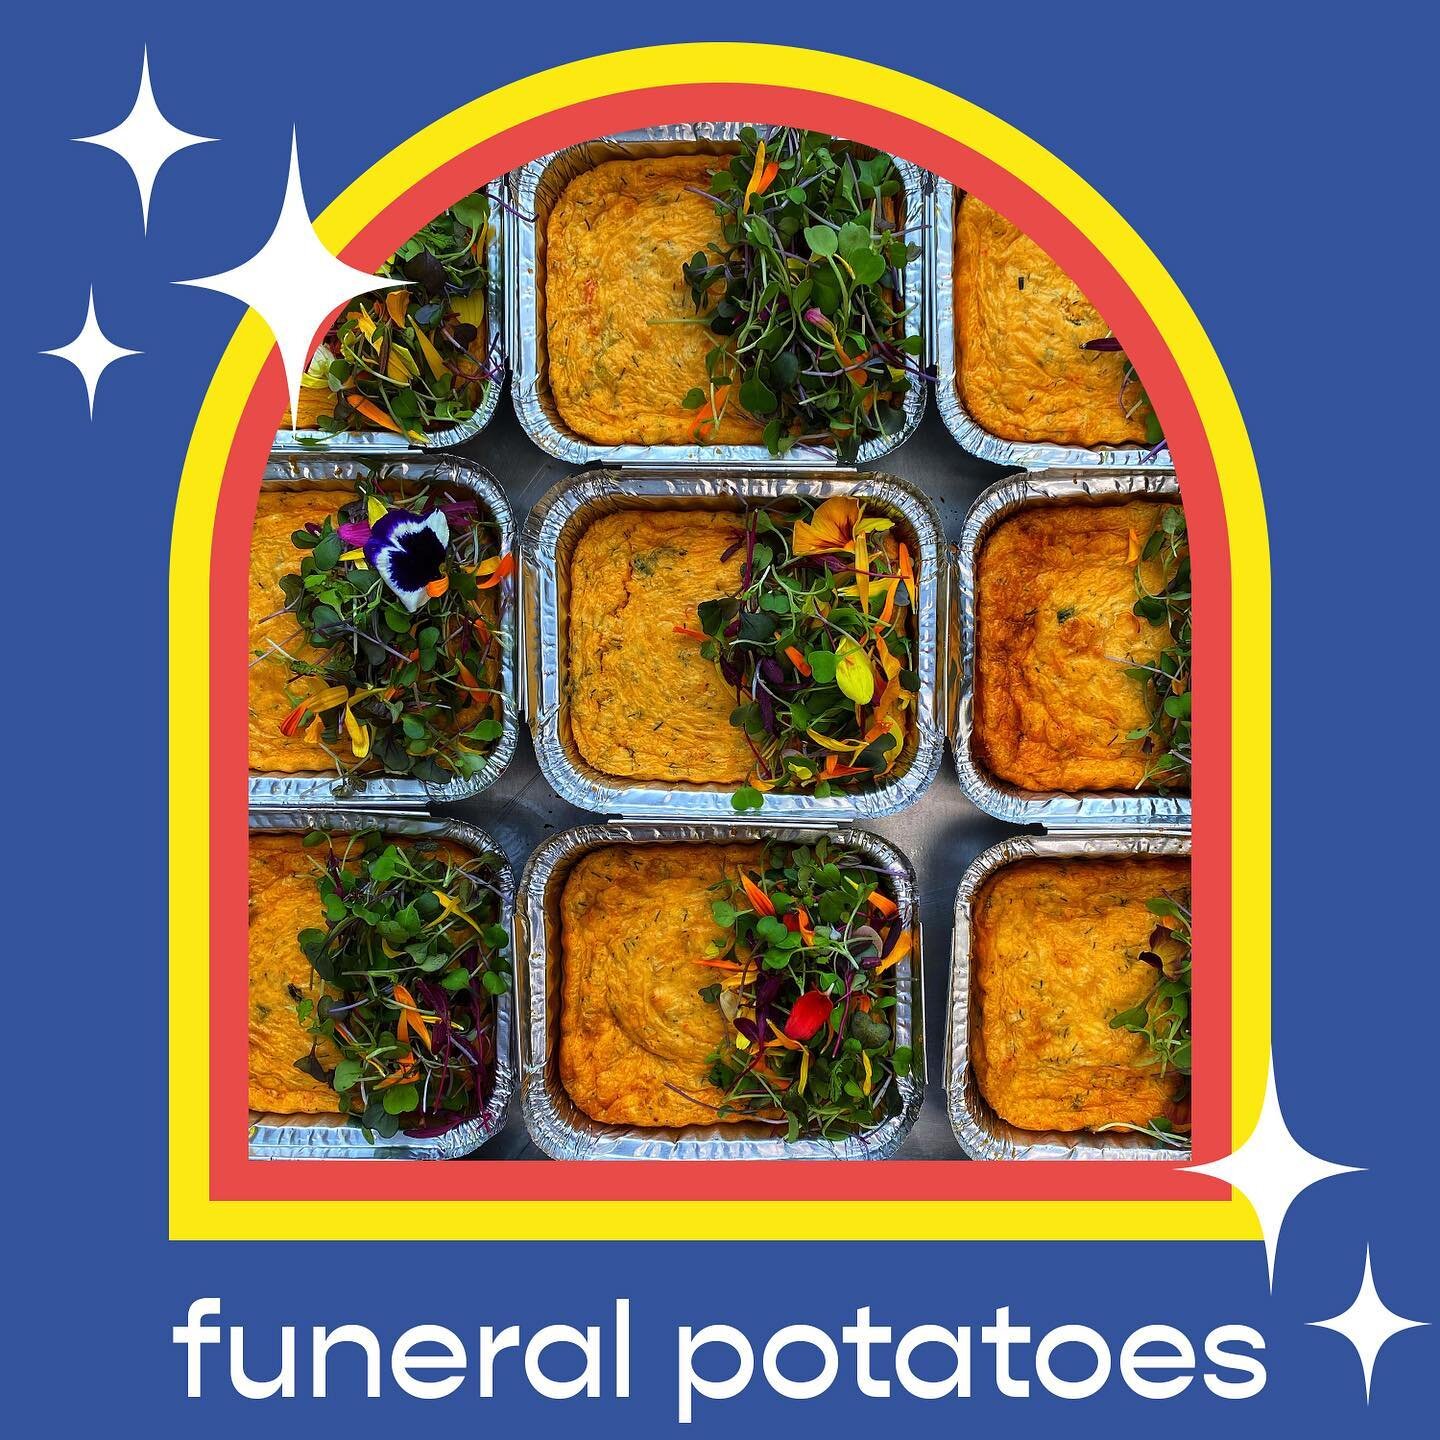 Eve Studnicka and Alexis Thomas-Rice are the duo behind @funeral.potatoes &ndash; a virtual restaurant with Midwestern comfort food at the heart of its chef-driven, locally sourced menus. The name Funeral Potatoes refers to the comfy, cheesy, hashbro